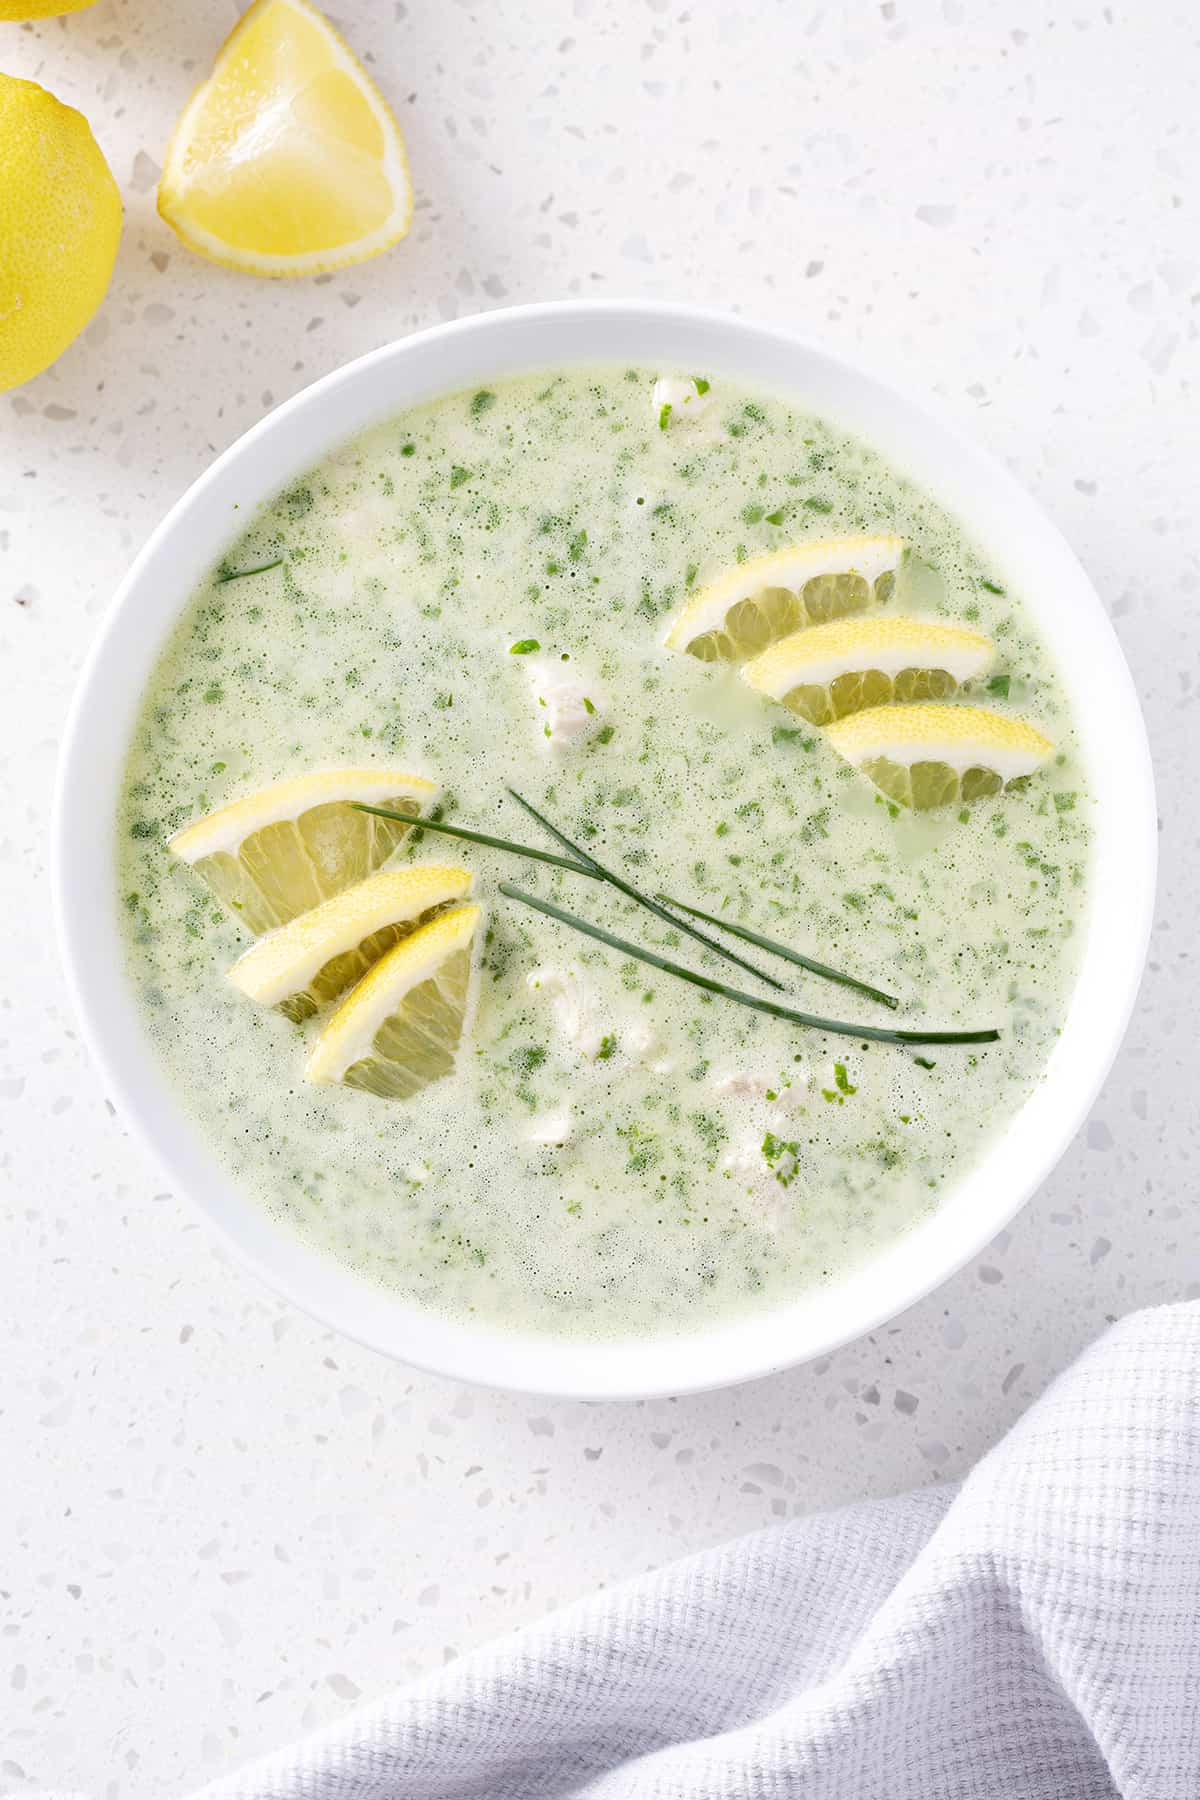 bowl of soup garnished with lemon and chives